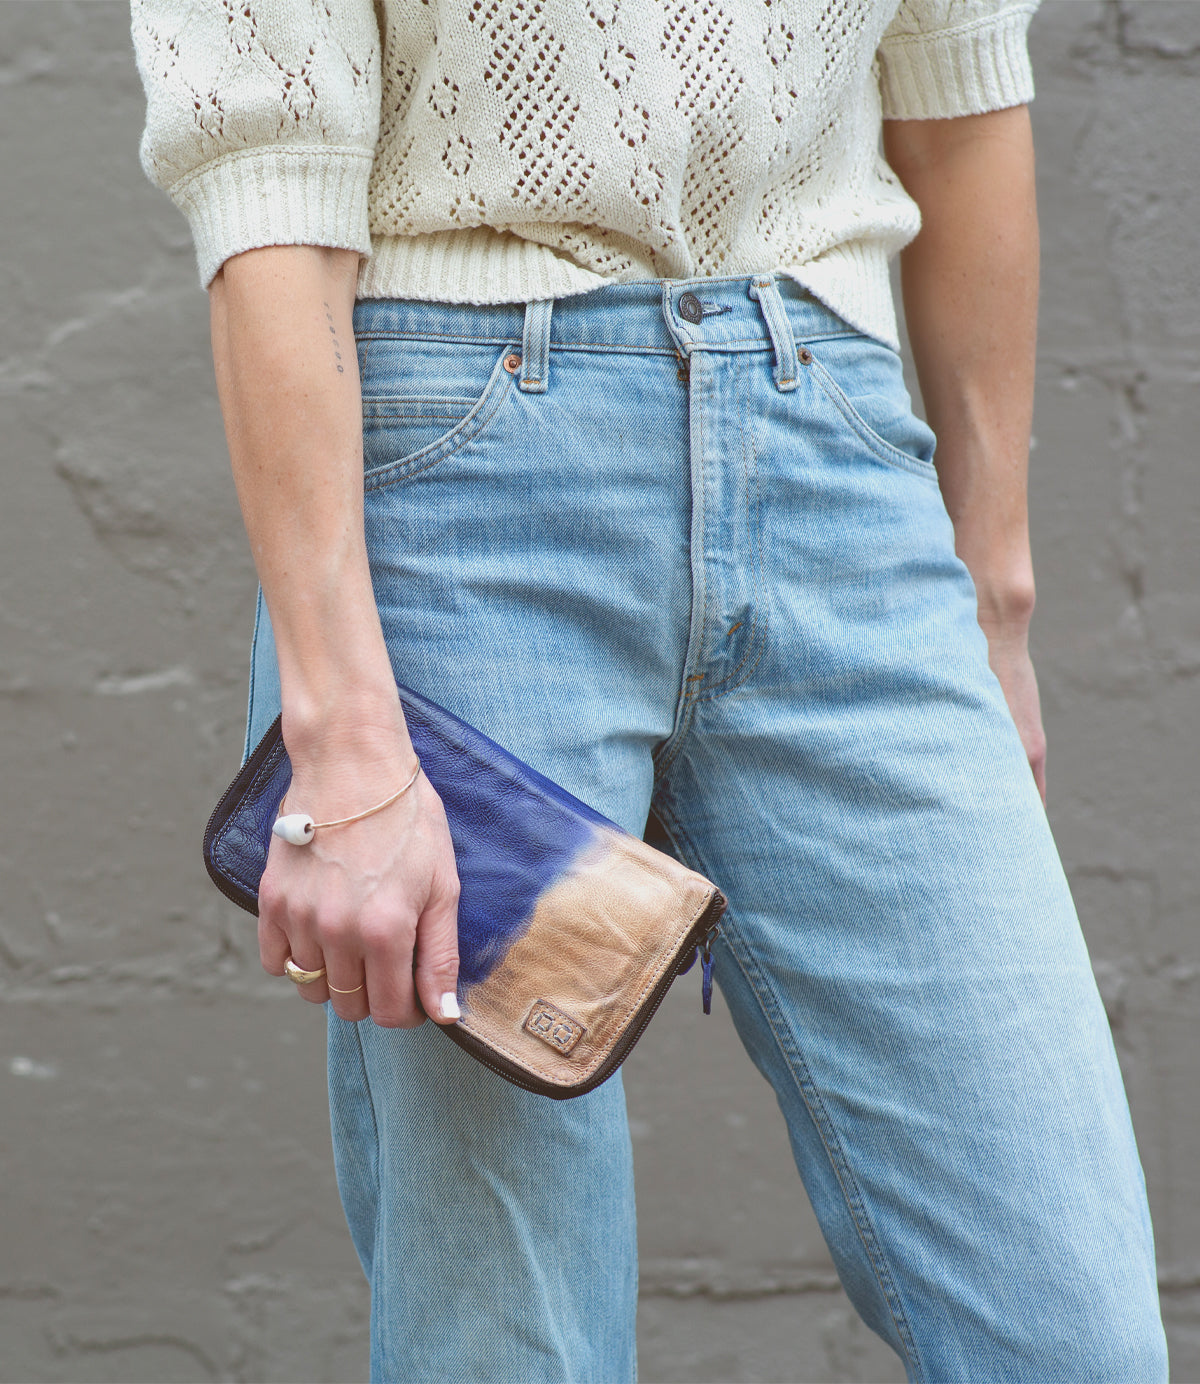 A woman wearing jeans and a sweater holding a Bed Stu Templeton II leather wallet.